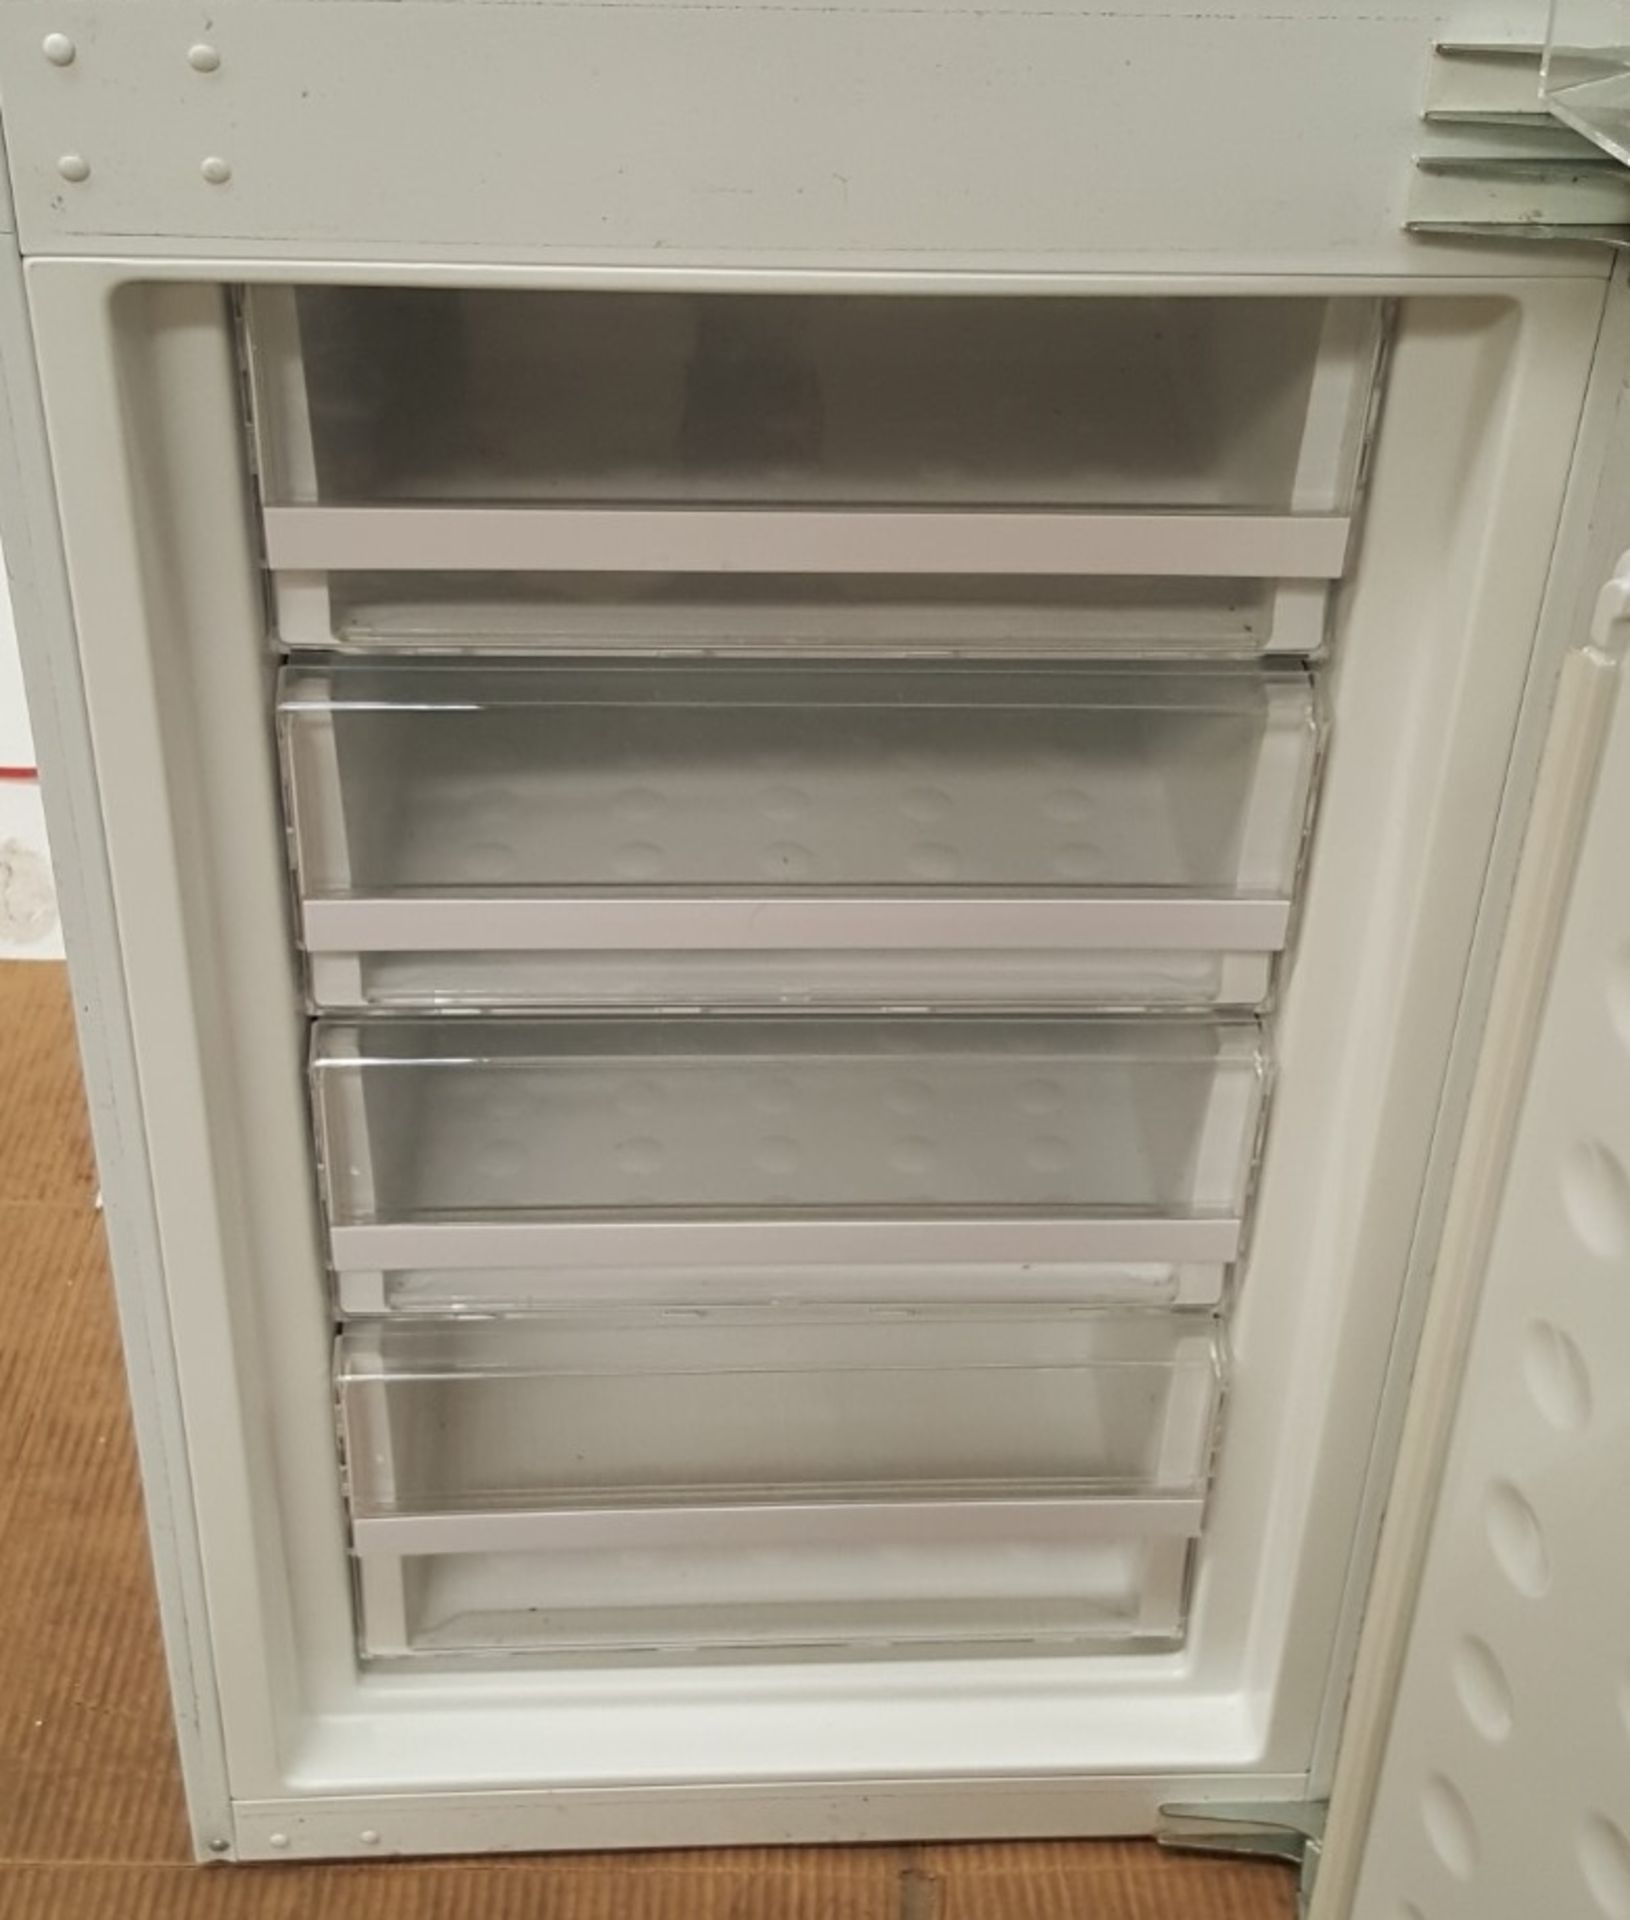 1 x Prima Integrated 50/50 Frost Free Fridge Freezer LPR475A1 - Ref BY188 - Image 6 of 8